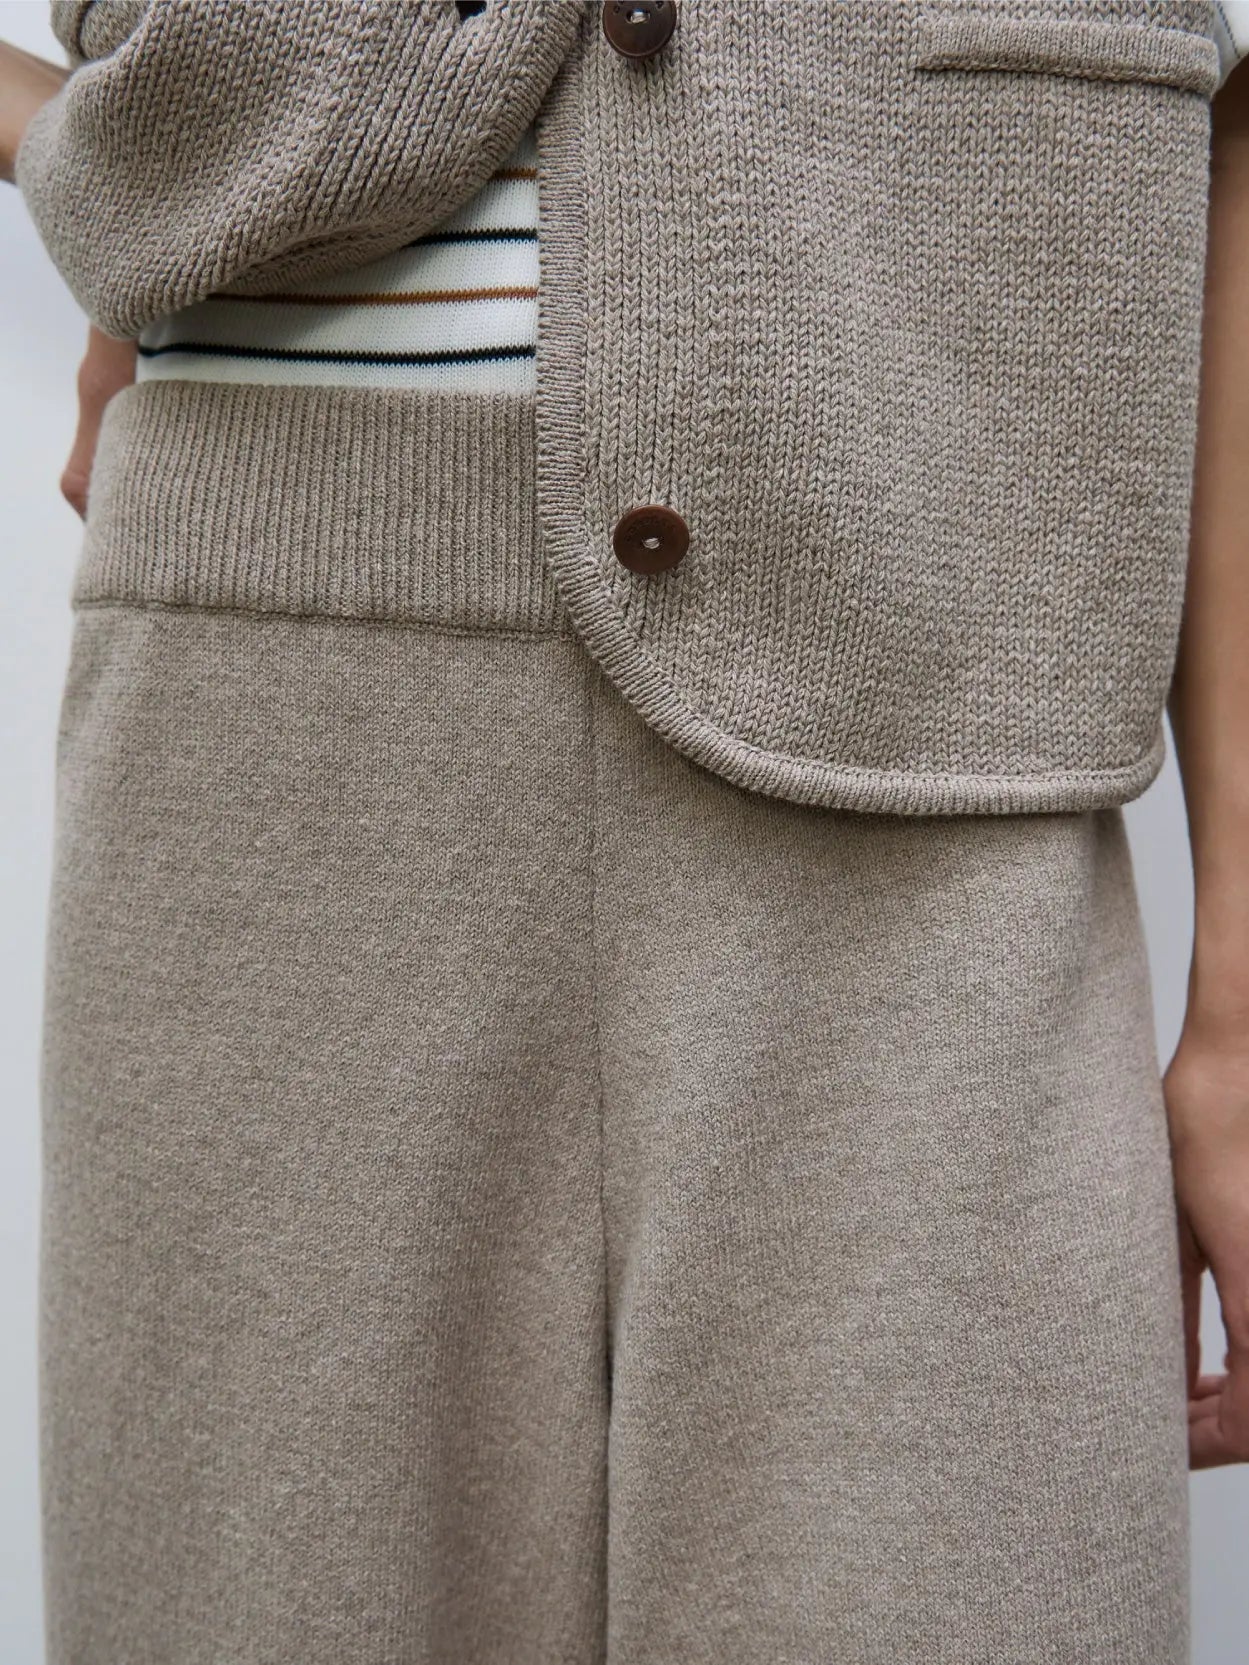 A pair of loose-fitting, knee-length, brownish-tan pants with an elastic waistband and ribbed cuffs at the hem is displayed on a plain white background. The material appears soft and slightly textured. Available as Cotton Knitted Pants Taupe by Cordera at Bassalstore in Barcelona.